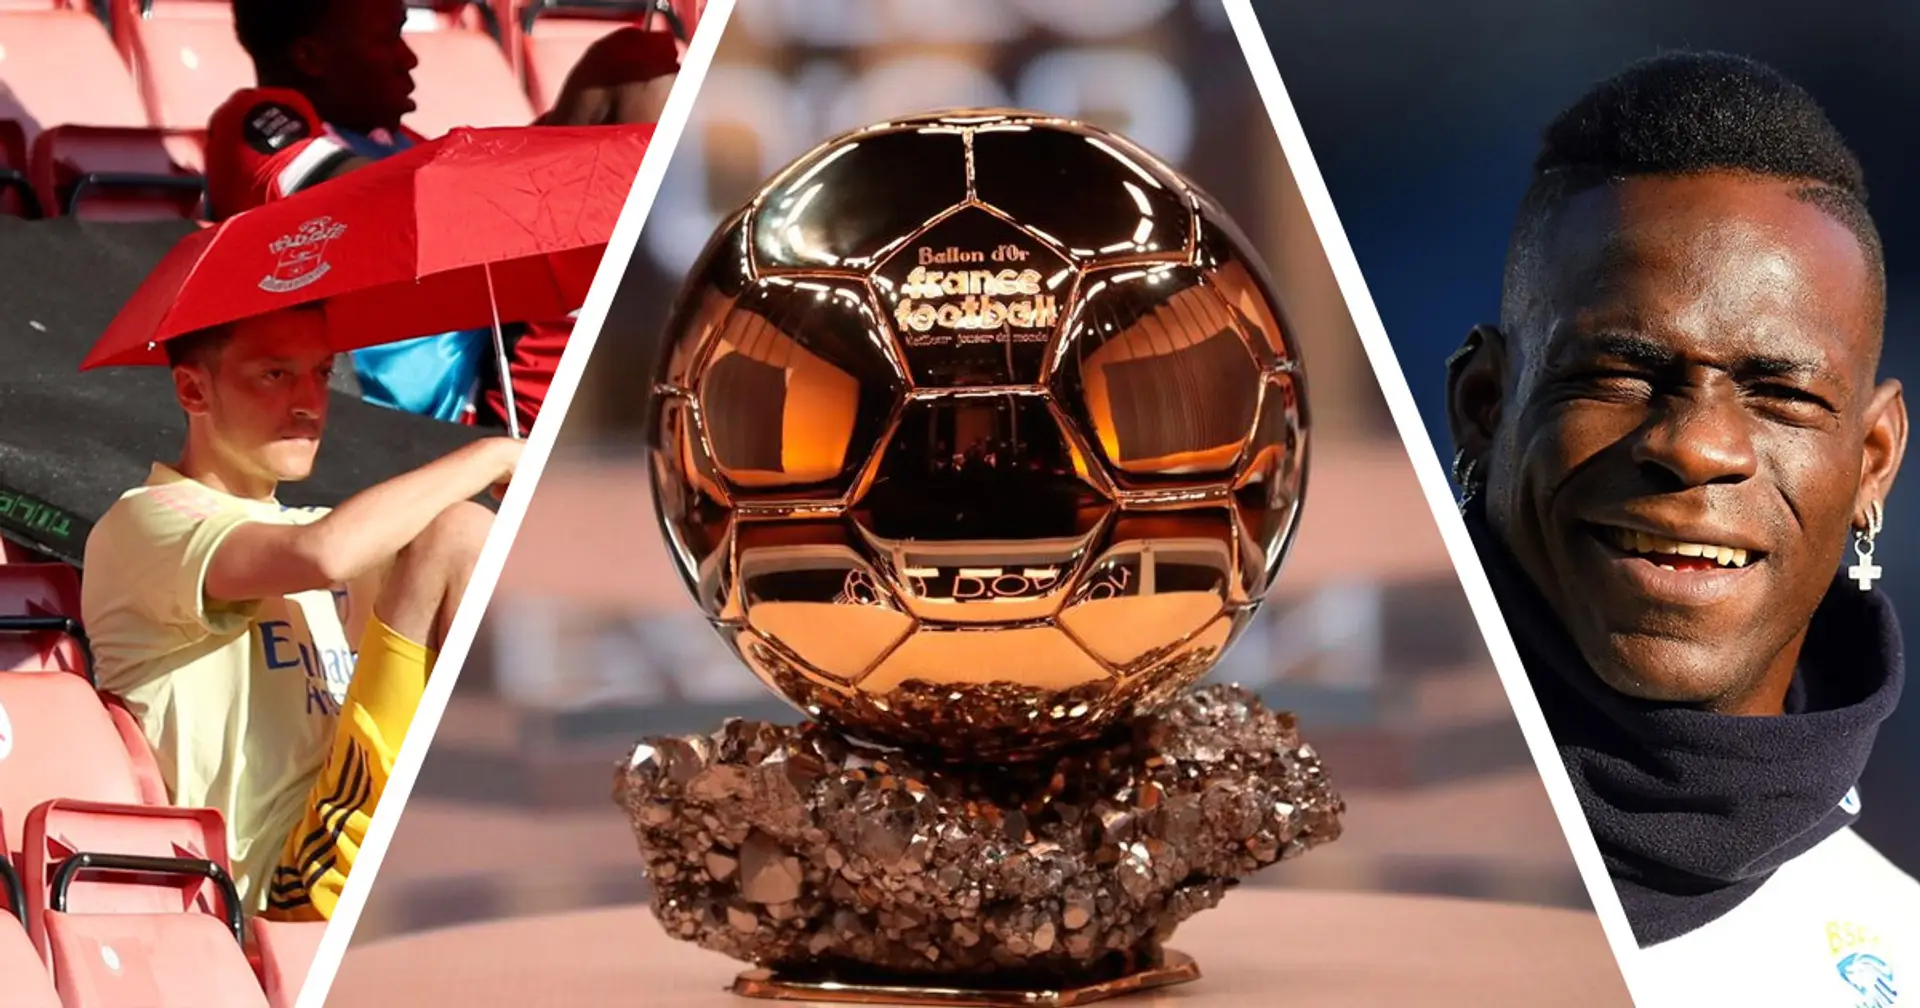 Oscar, Mario Balotelli and Mesut Ozil should've won 3 out of last 8 Ballons d'Or, according to prediction made in 2012